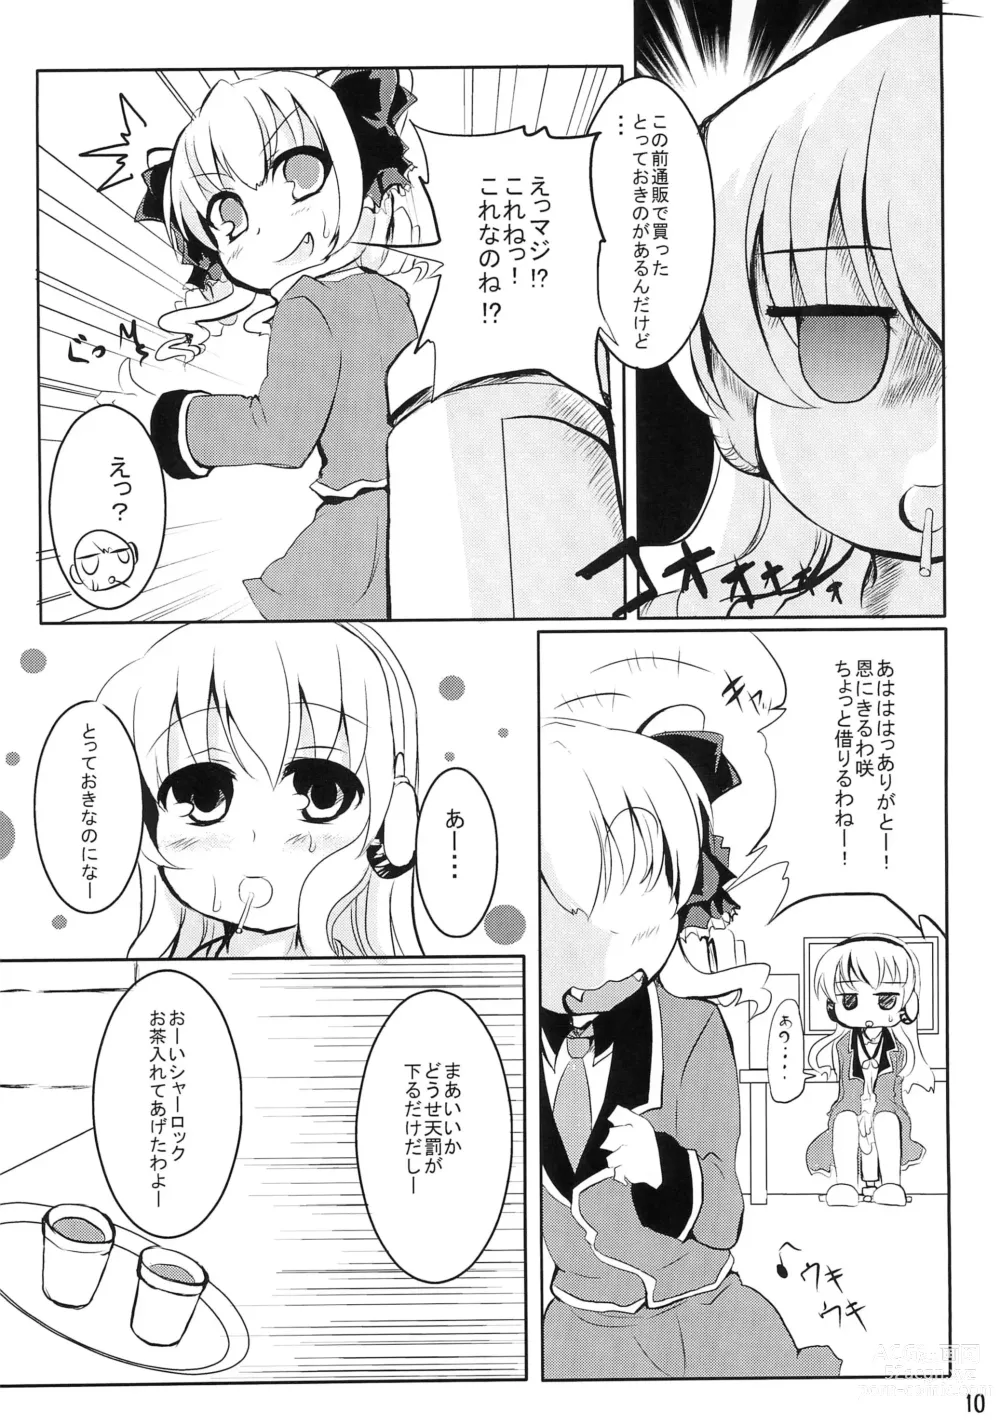 Page 10 of doujinshi Milky Syrup